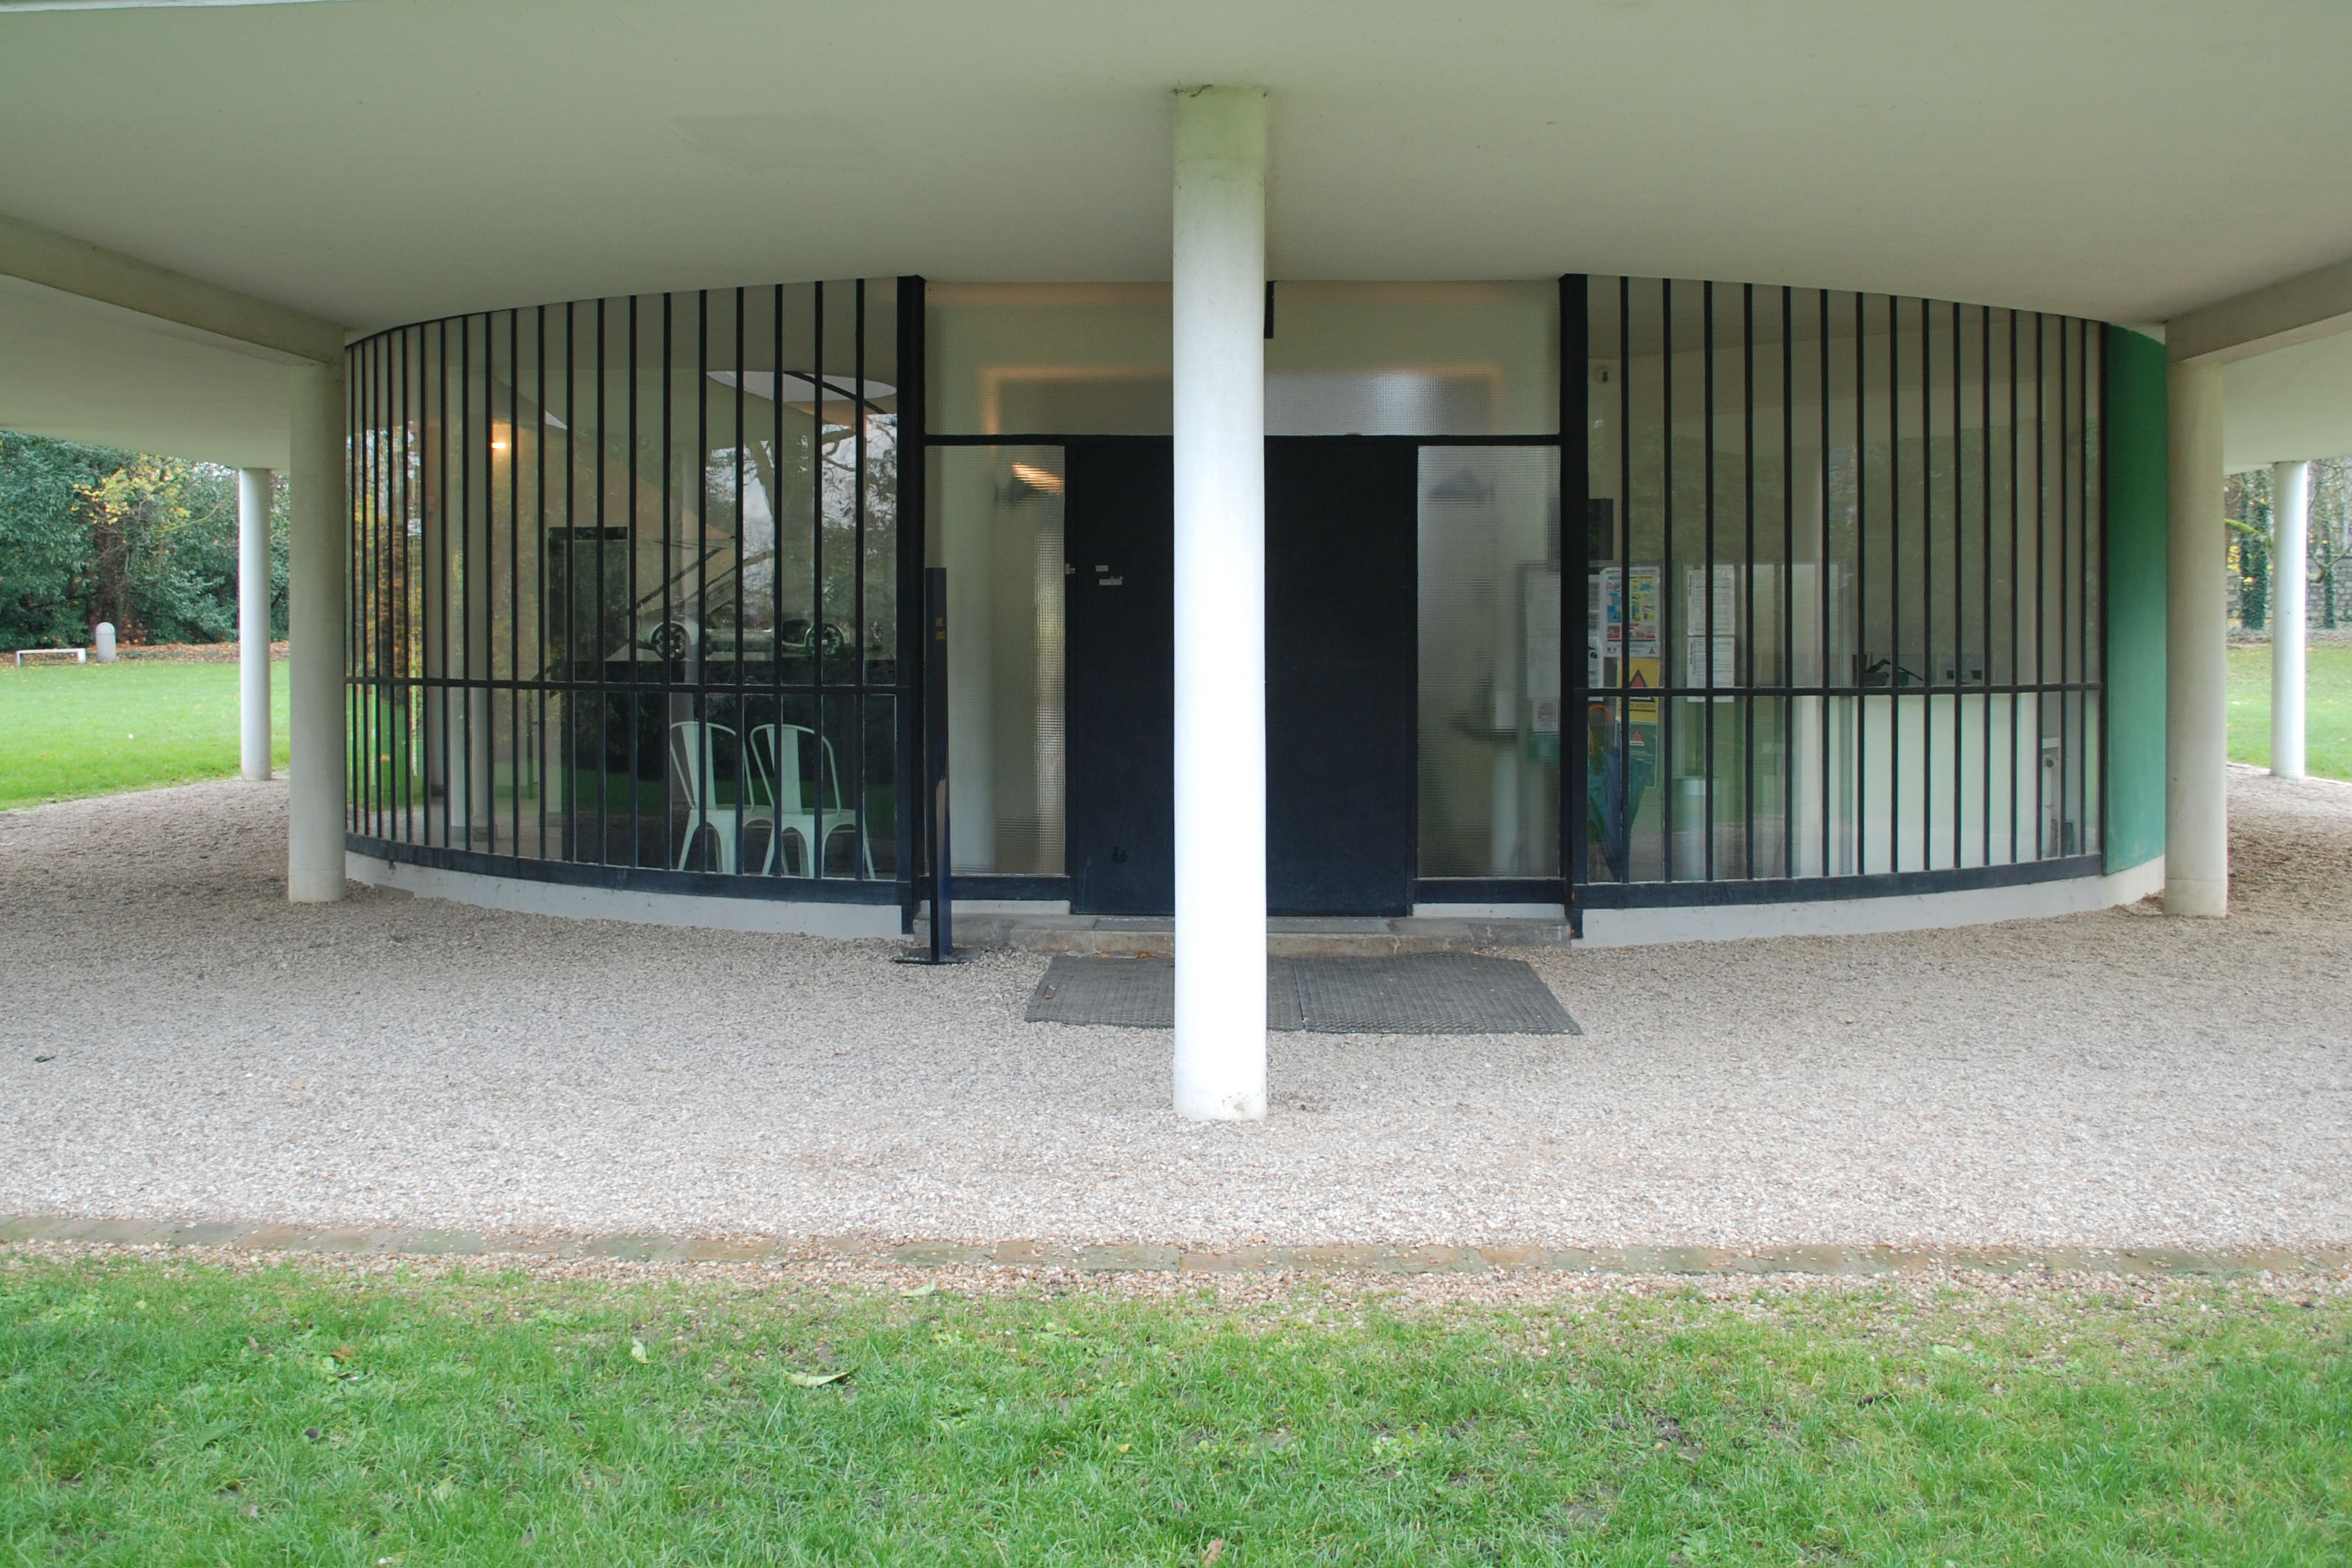 LE CORBUSIER, POISSY: TRAFFIC AND GROUND BELOW